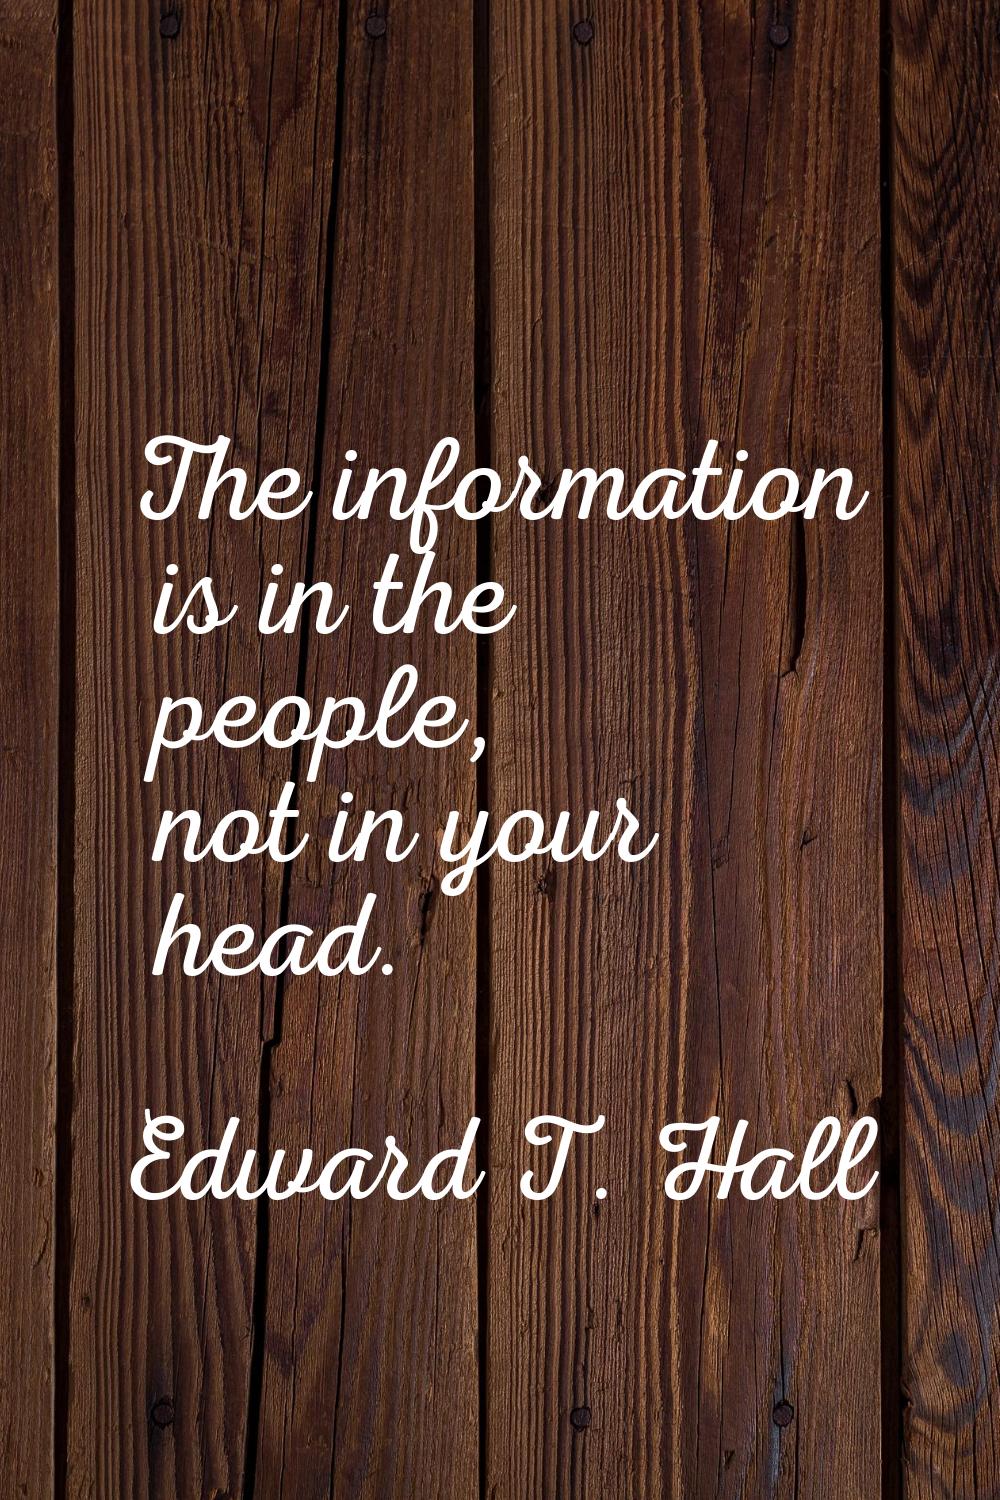 The information is in the people, not in your head.